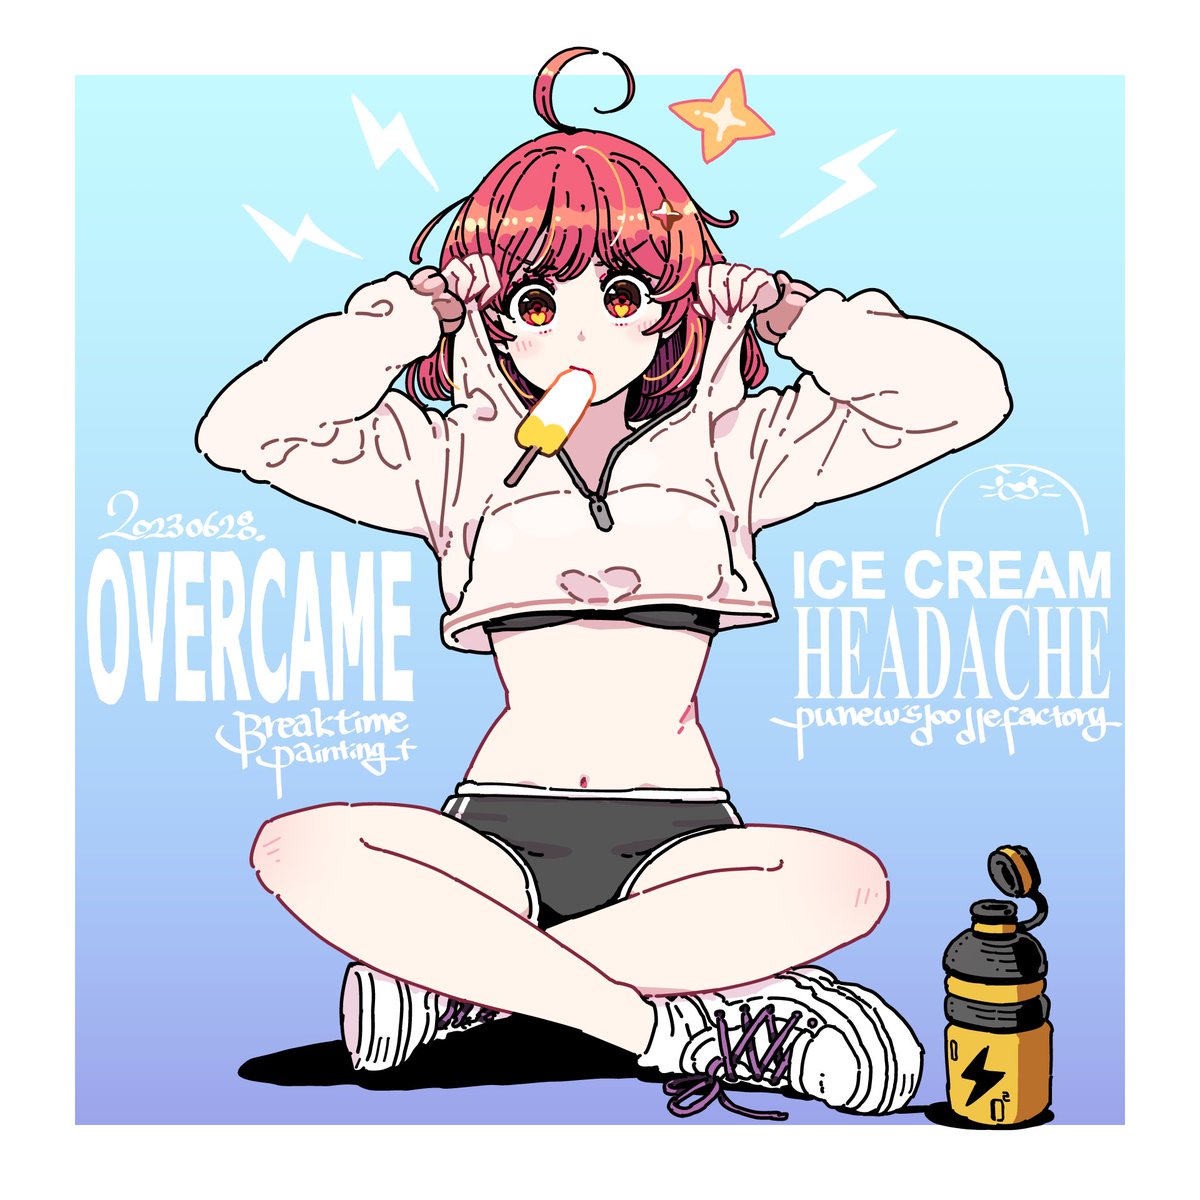 [Breaktime Cooling]
20230628

‘I overcame my ice cream headache!’

-PUNEW’s doodle factory-